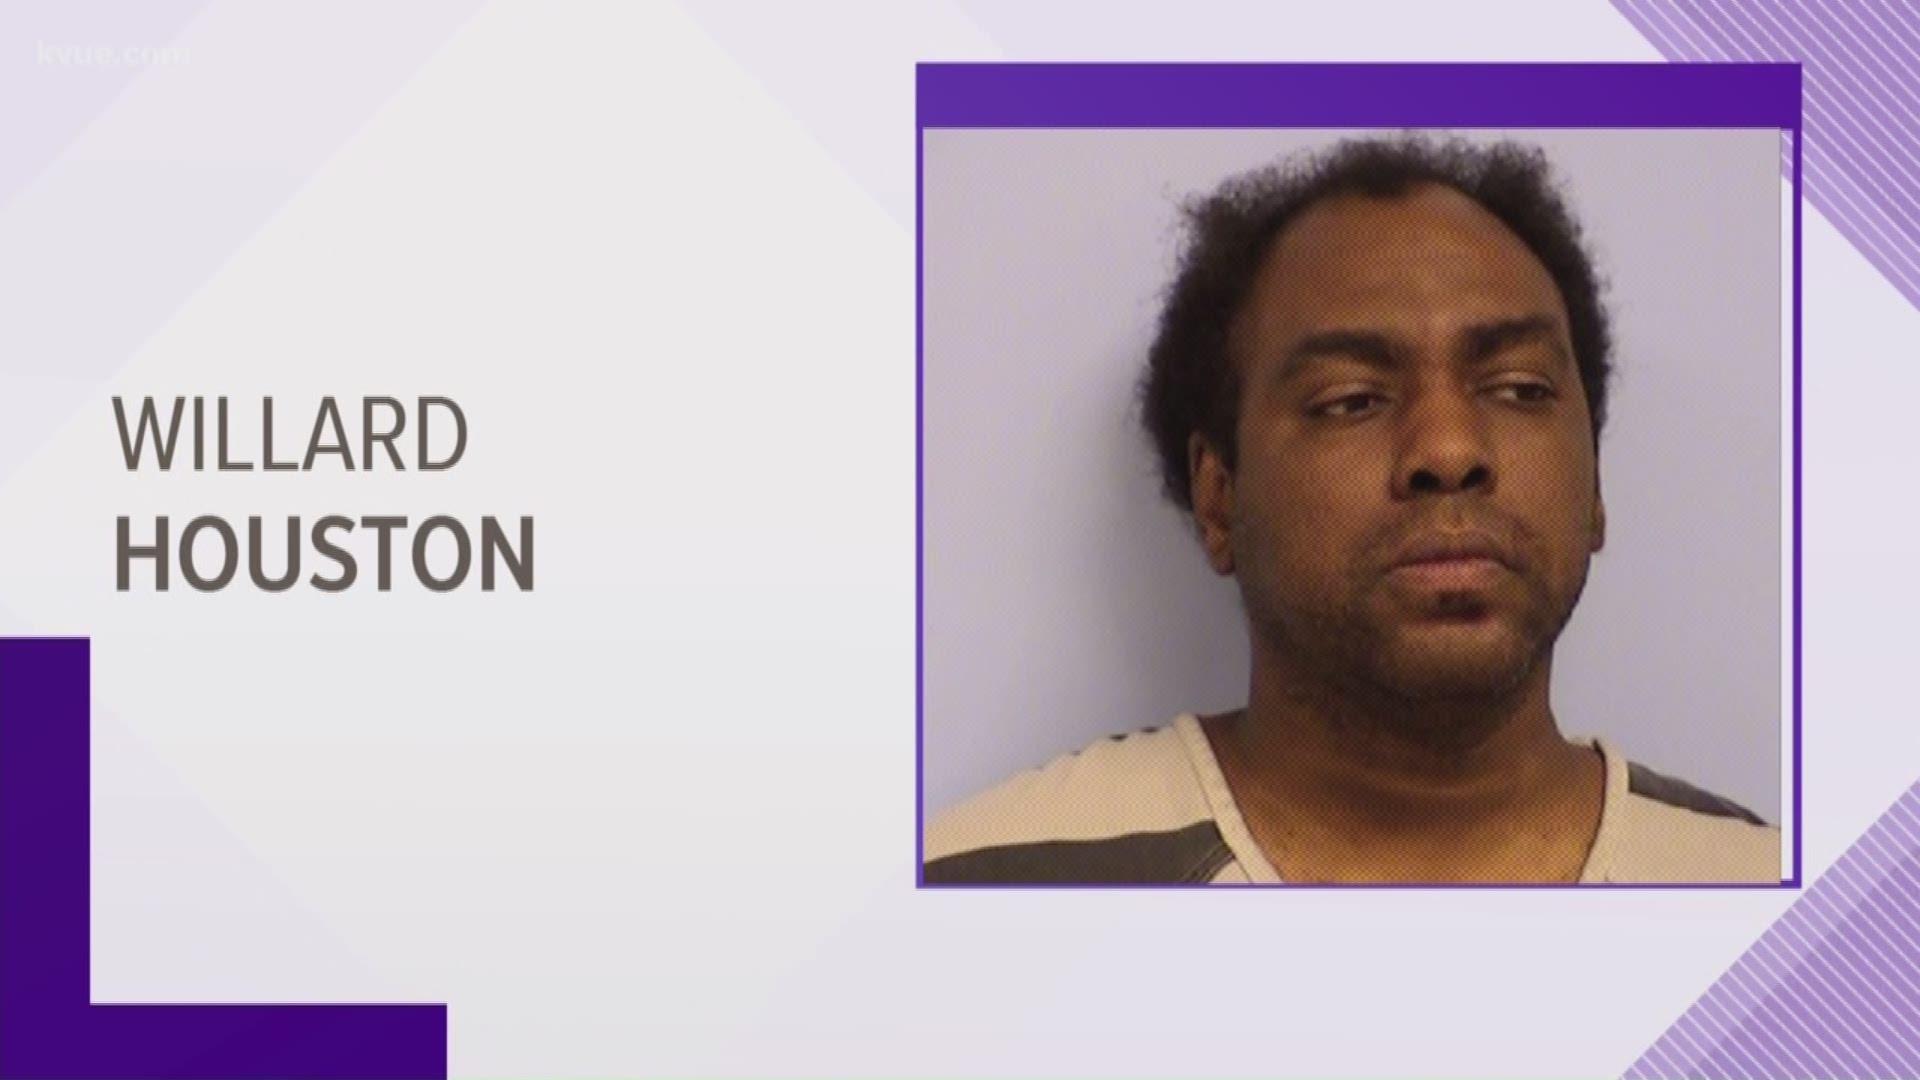 He's accused of attacking and beating a disabled woman with her own wheelchair.